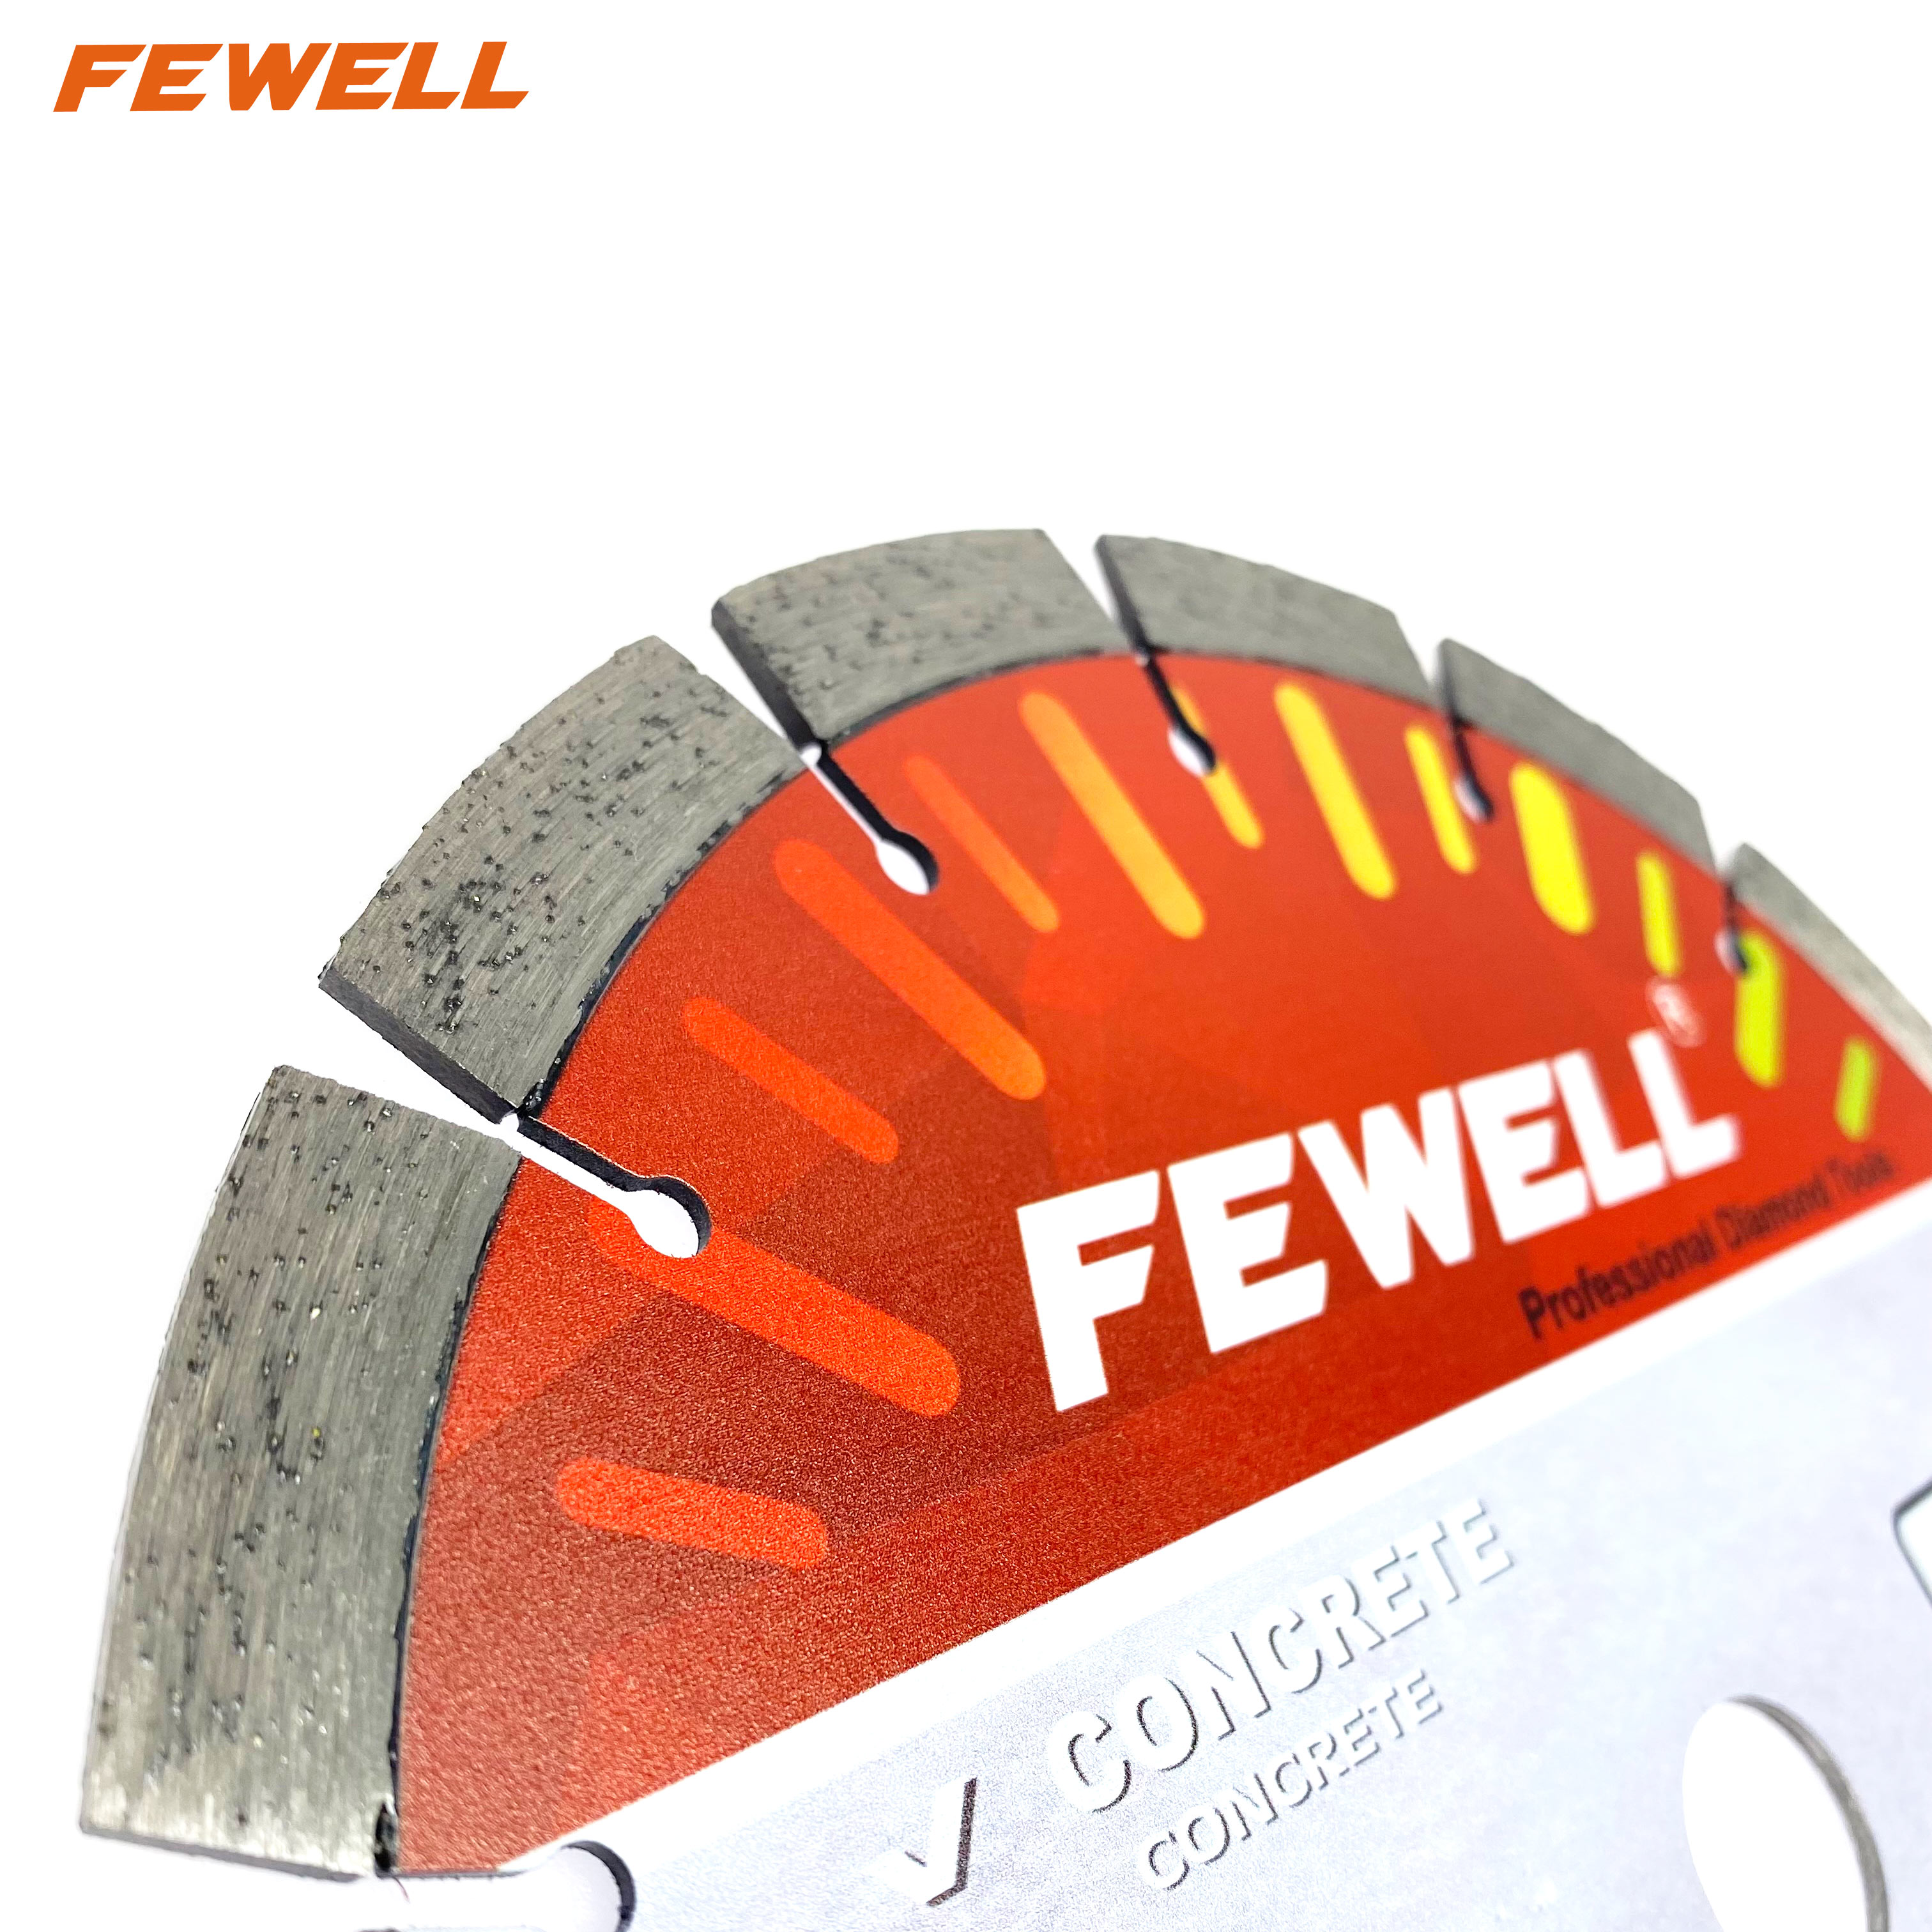 Premium quality laser welded 9/14inch 230/350*12mm segmented diamond saw blade for cutting concrete 